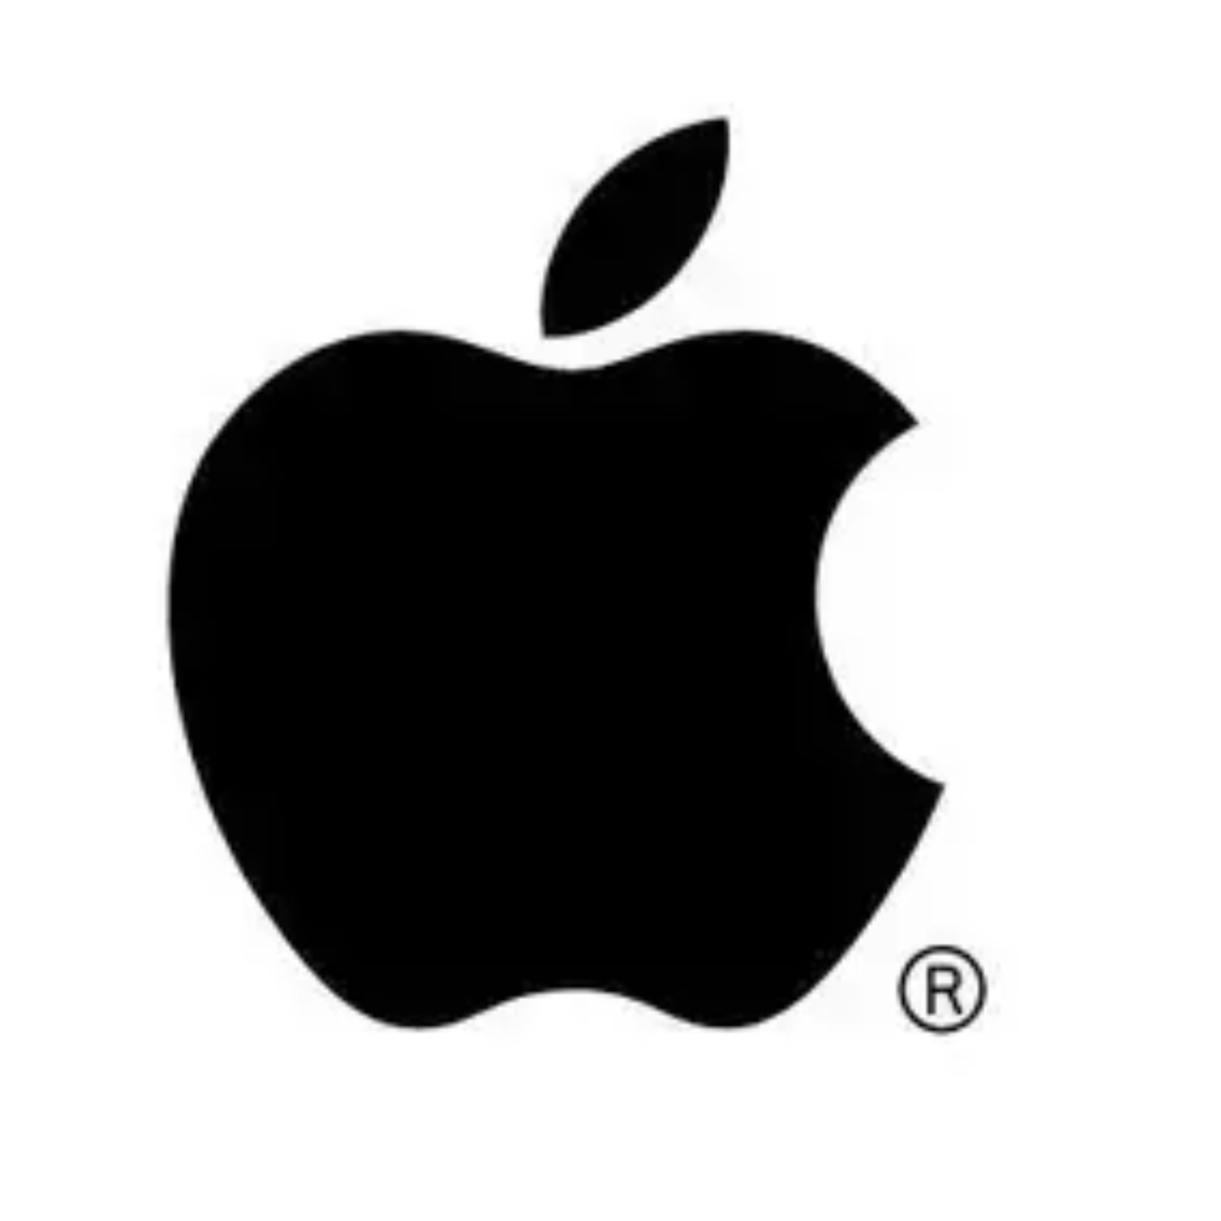  's images